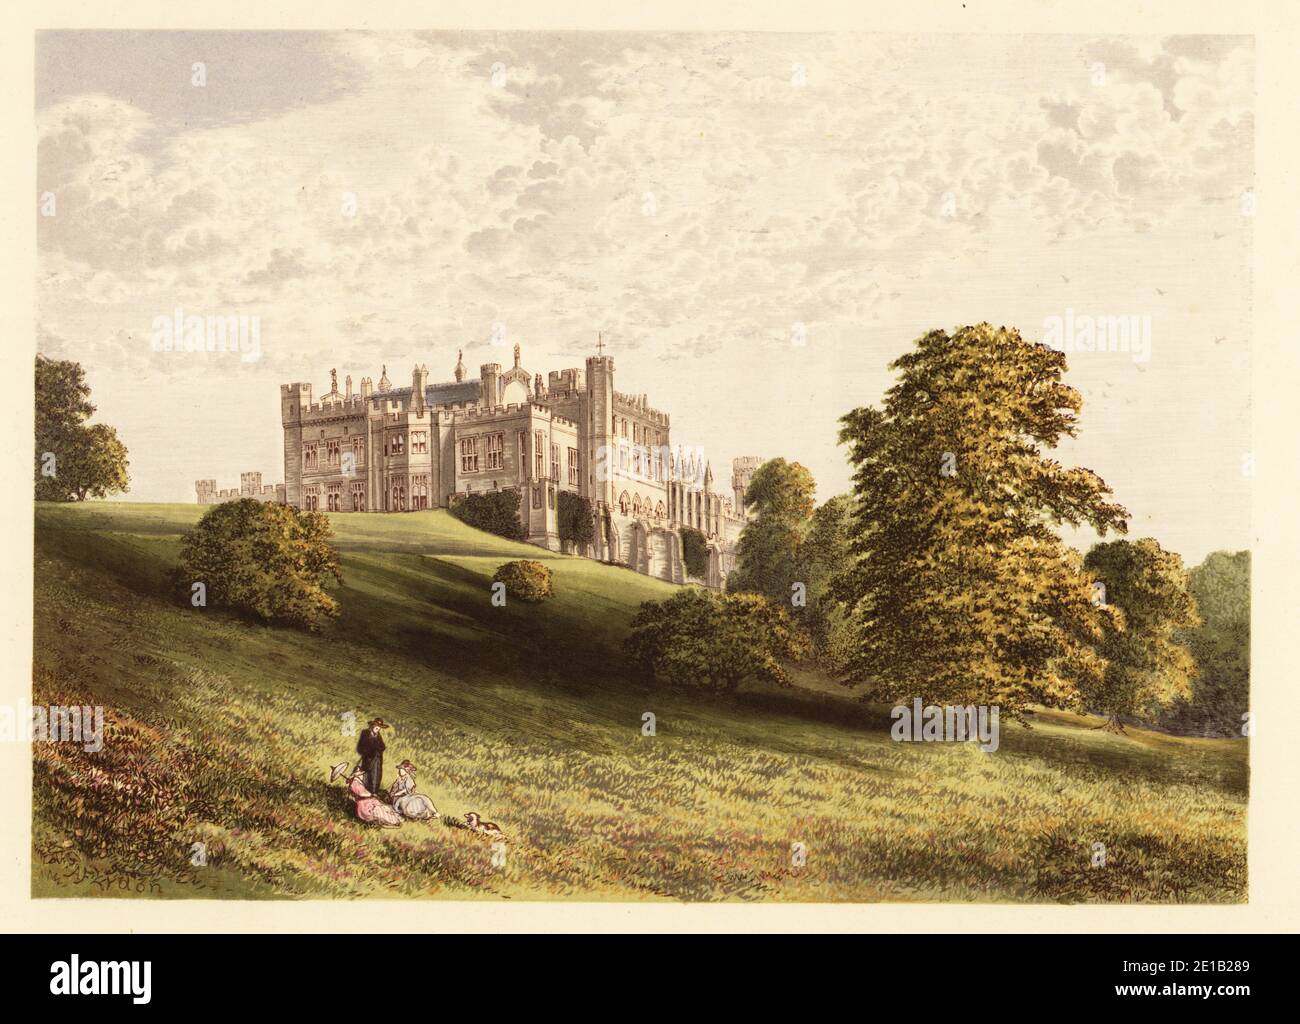 Lambton Castle., County Durham, England. Stately home in the style of a Norman castle built by architect Joseph Bonomi and his son Ignatius Bonomi between 1820 and 1828 for John Lambton, 1st Earl of Durham. Colour woodblock by Benjamin Fawcett in the Baxter process of an illustration by Alexander Francis Lydon from Reverend Francis Orpen Morris’s Picturesque Views of the Seats of Noblemen and Gentlemen of Great Britain and Ireland, William Mackenzie, London, 1880. Stock Photo